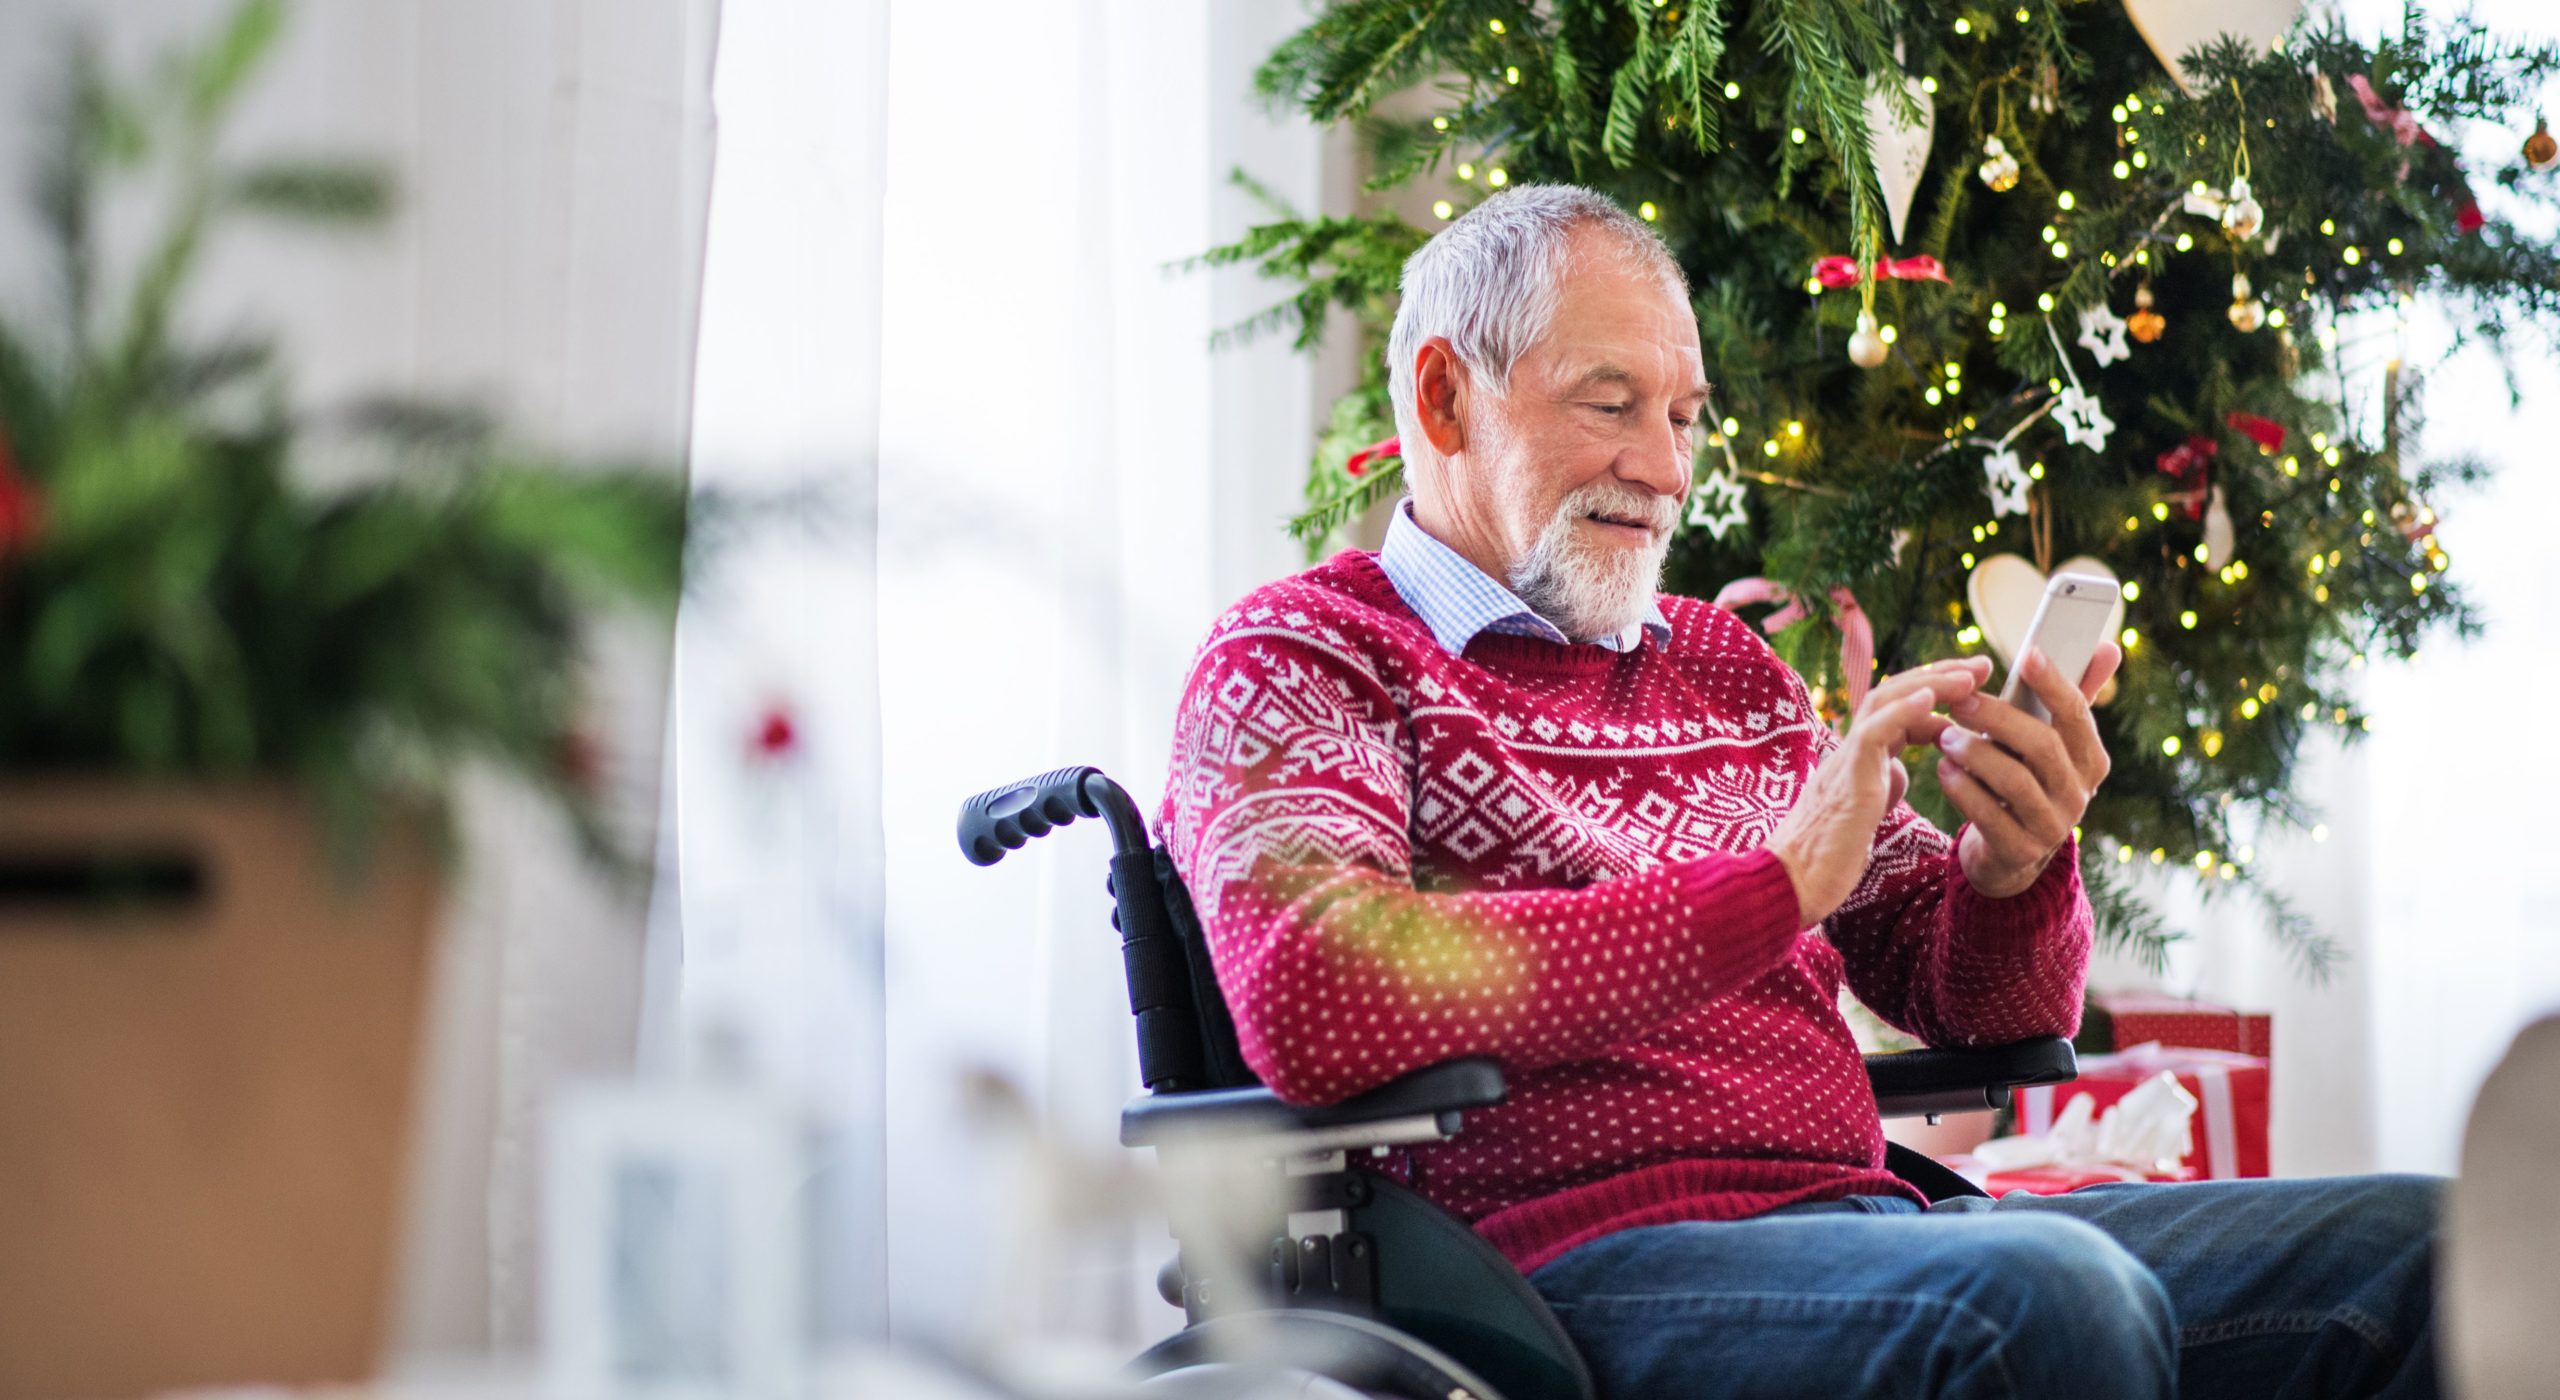 A senior man wearing a red sweater sits in a wheelchair and texts on his phone at home during the holidays. Behind him is a Christmas tree with gifts below, and white curtains with light shining through.